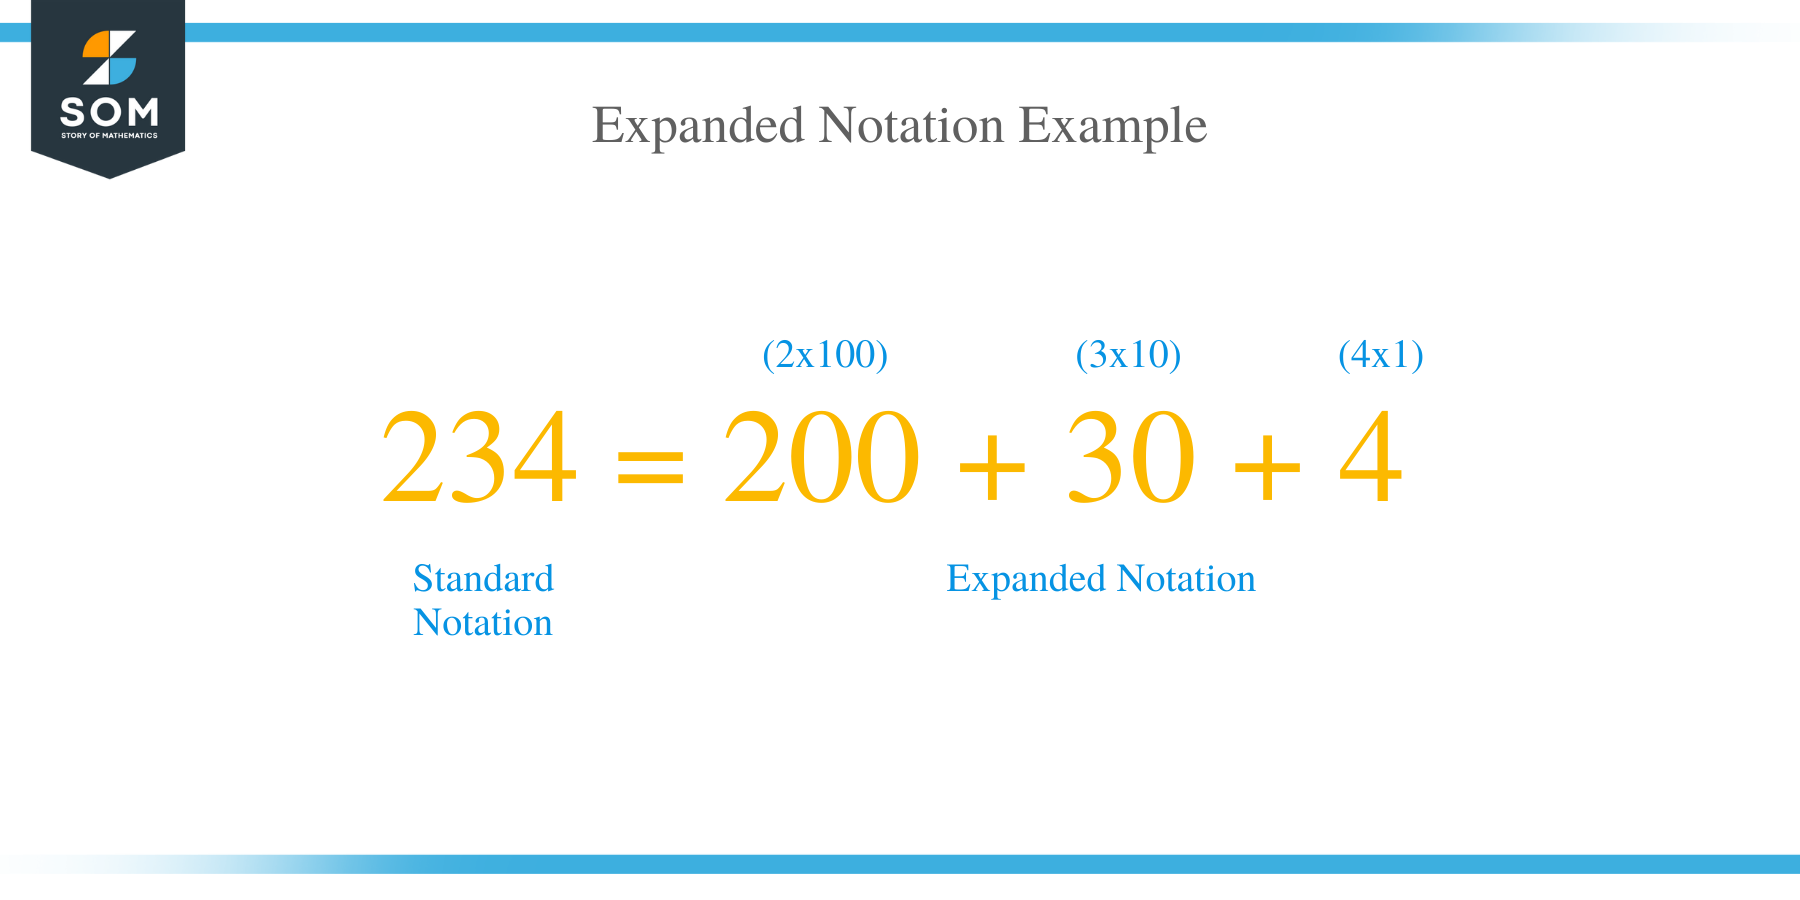 Expanded Notation Example